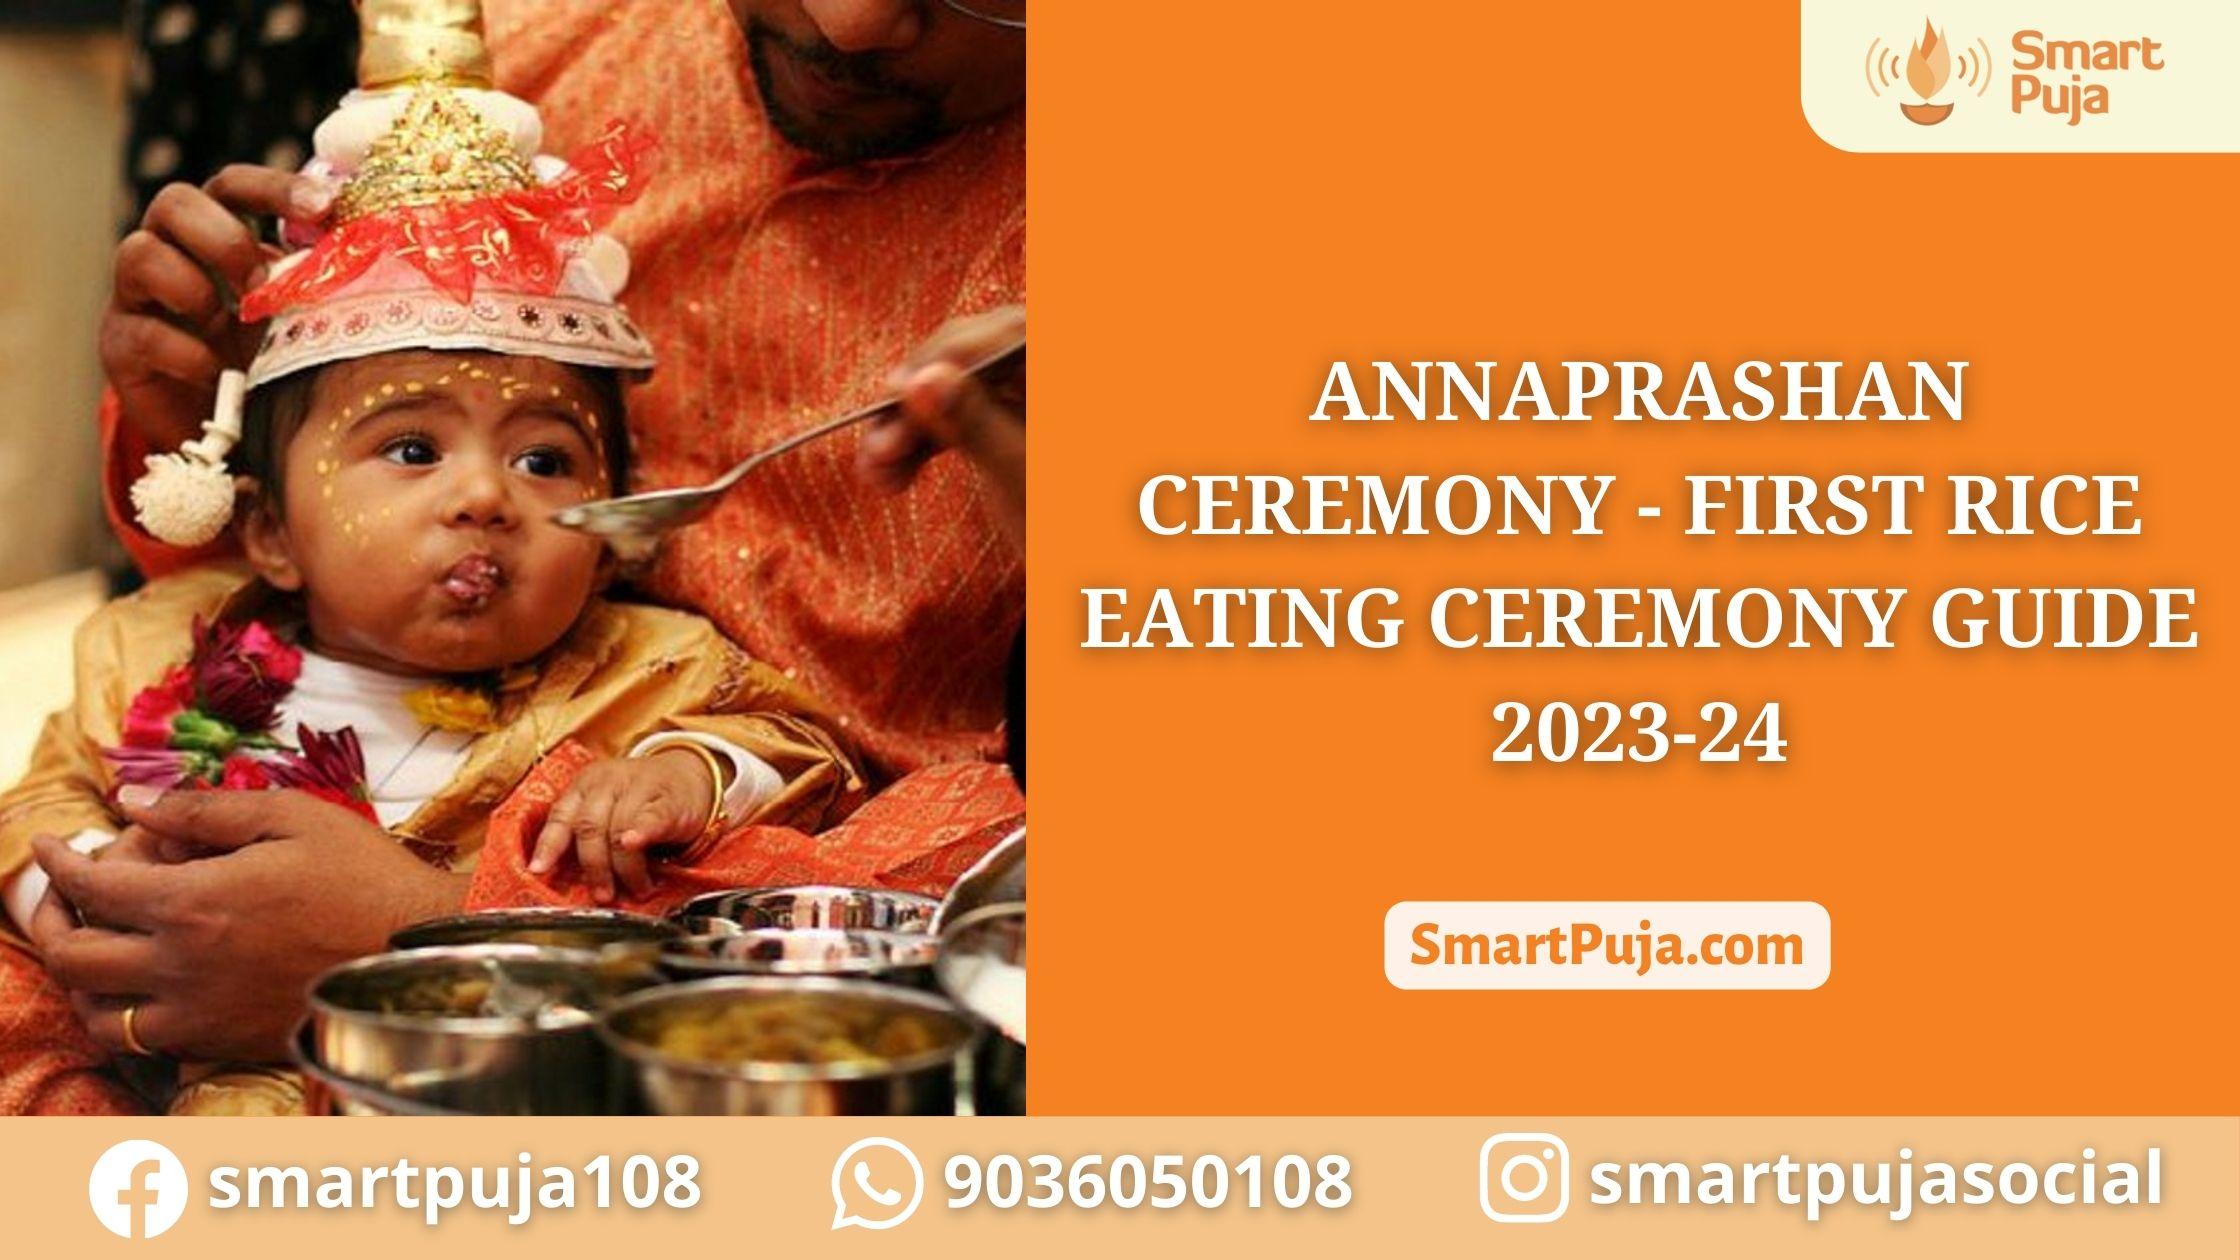 Annaprashan Ceremony First Rice Eating Ceremony Guide 2023